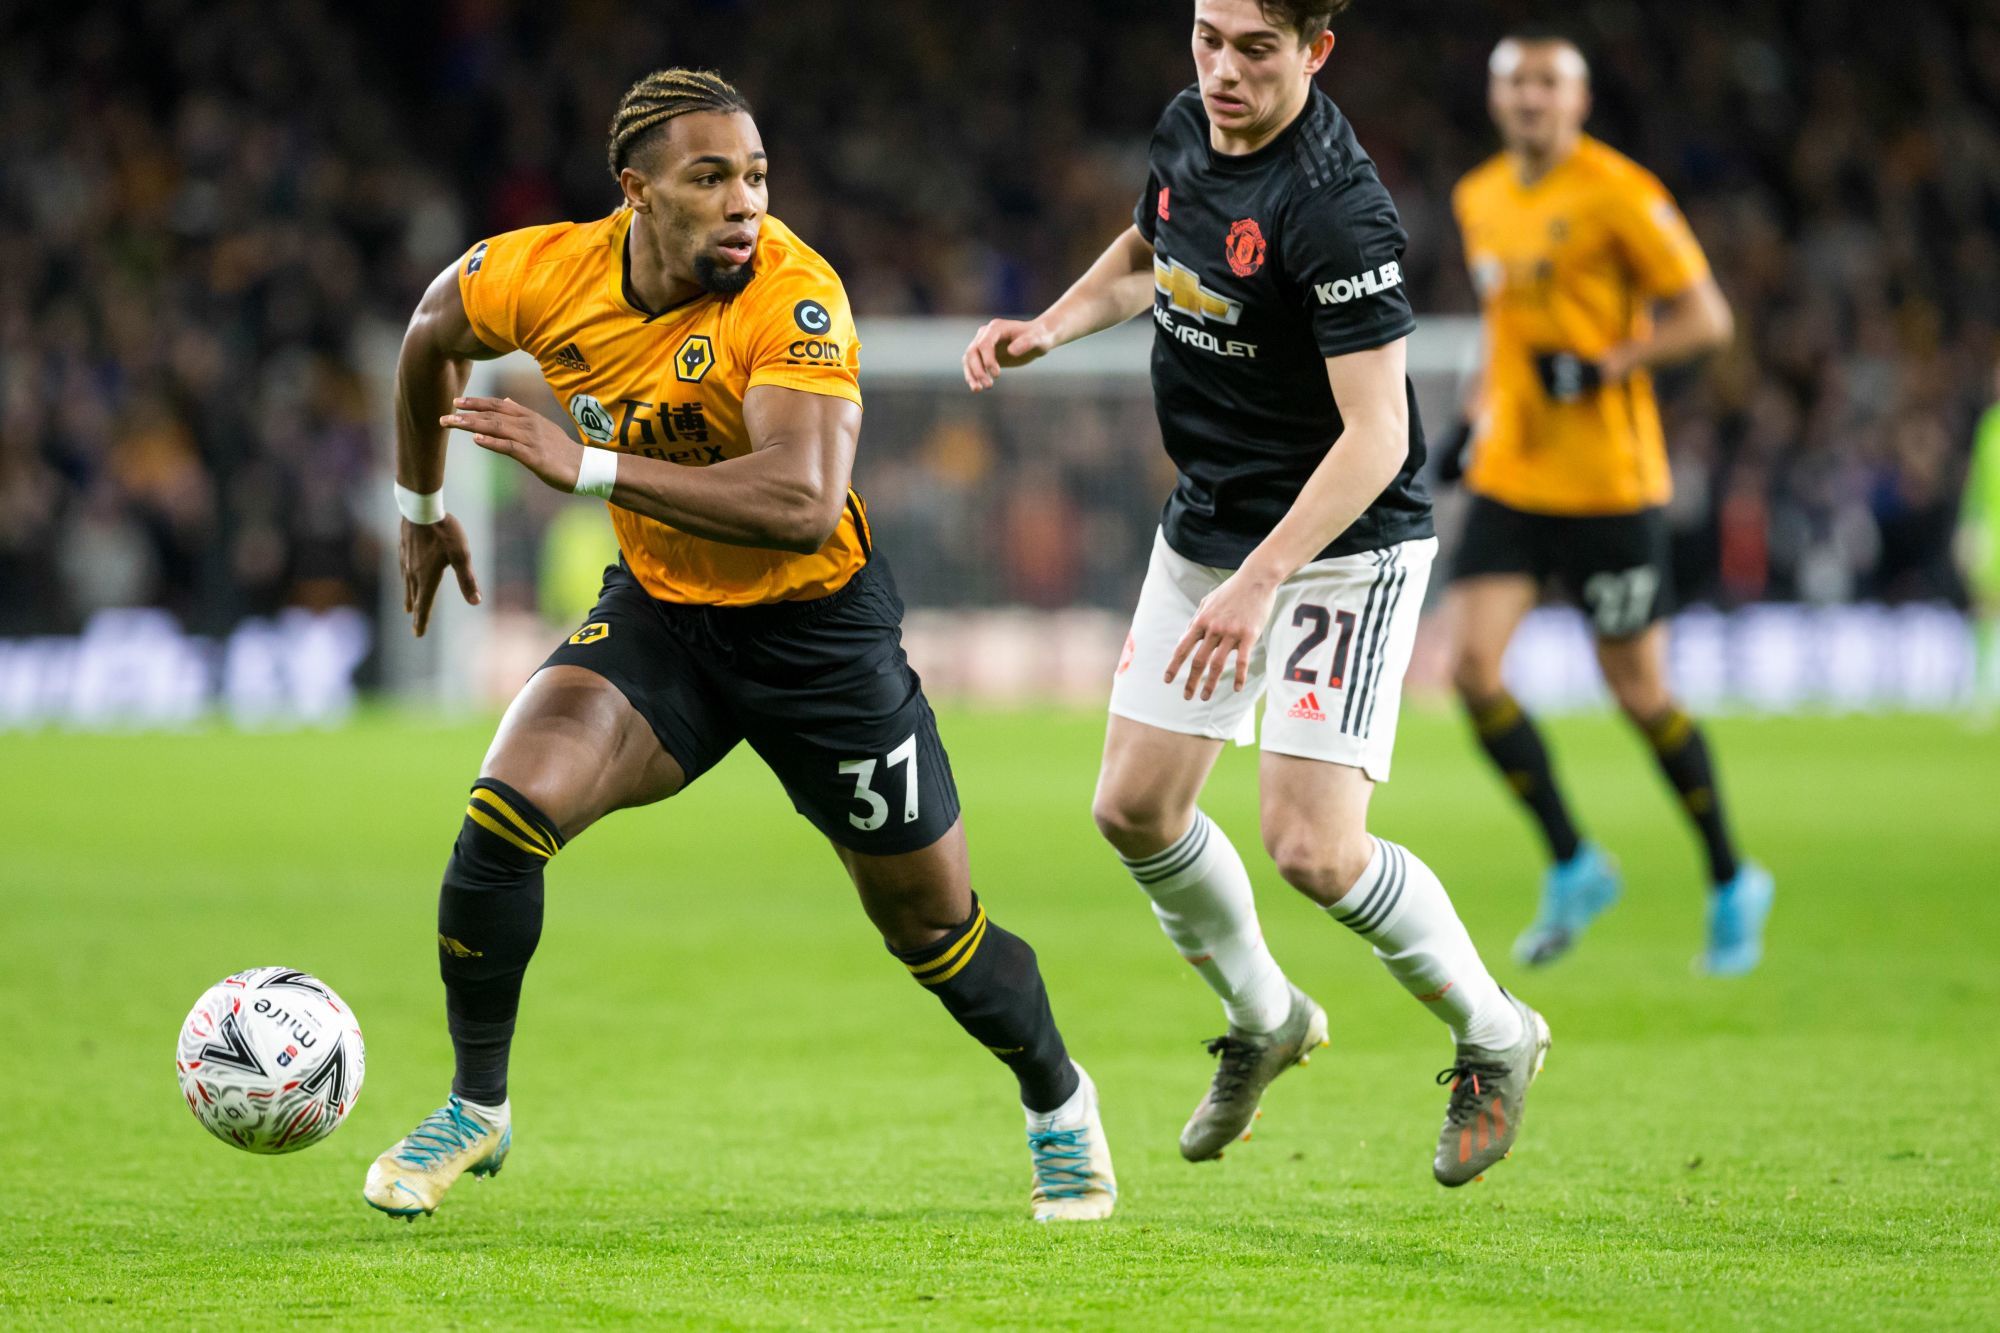 4th January 2020; Molineux Stadium, Wolverhampton, West Midlands, England; English FA Cup Football, Wolverhampton Wanderers versus Manchester United; Adama Traore of Wolverhampton Wanderers looking for a pass as he gets past Daniel James of Manchester United   - Strictly Editorial Use Only. No use with unauthorized audio, video, data, fixture lists, club/league logos or 'live' services. Online in-match use limited to 120 images, no video emulation. No use in betting, games or single club/league/player publications 

Photo by Icon Sport - Daniel JAMES - Adama TRAORE - Molineux Stadium - Wolverhampton (Angleterre)